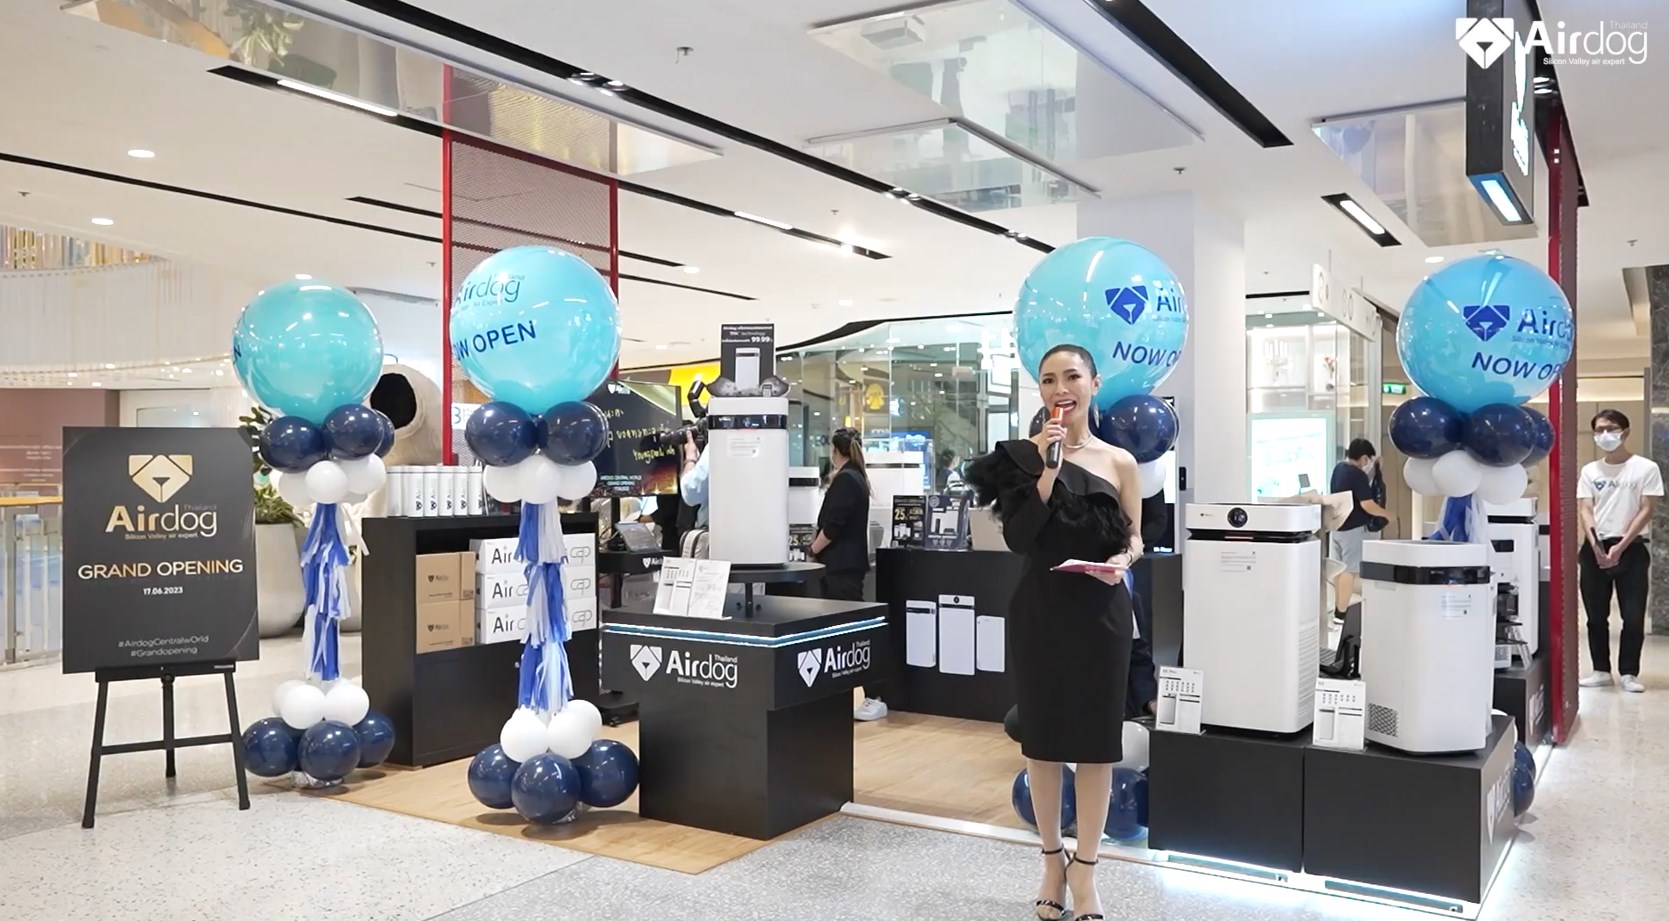 airdog grand opening in Thailand